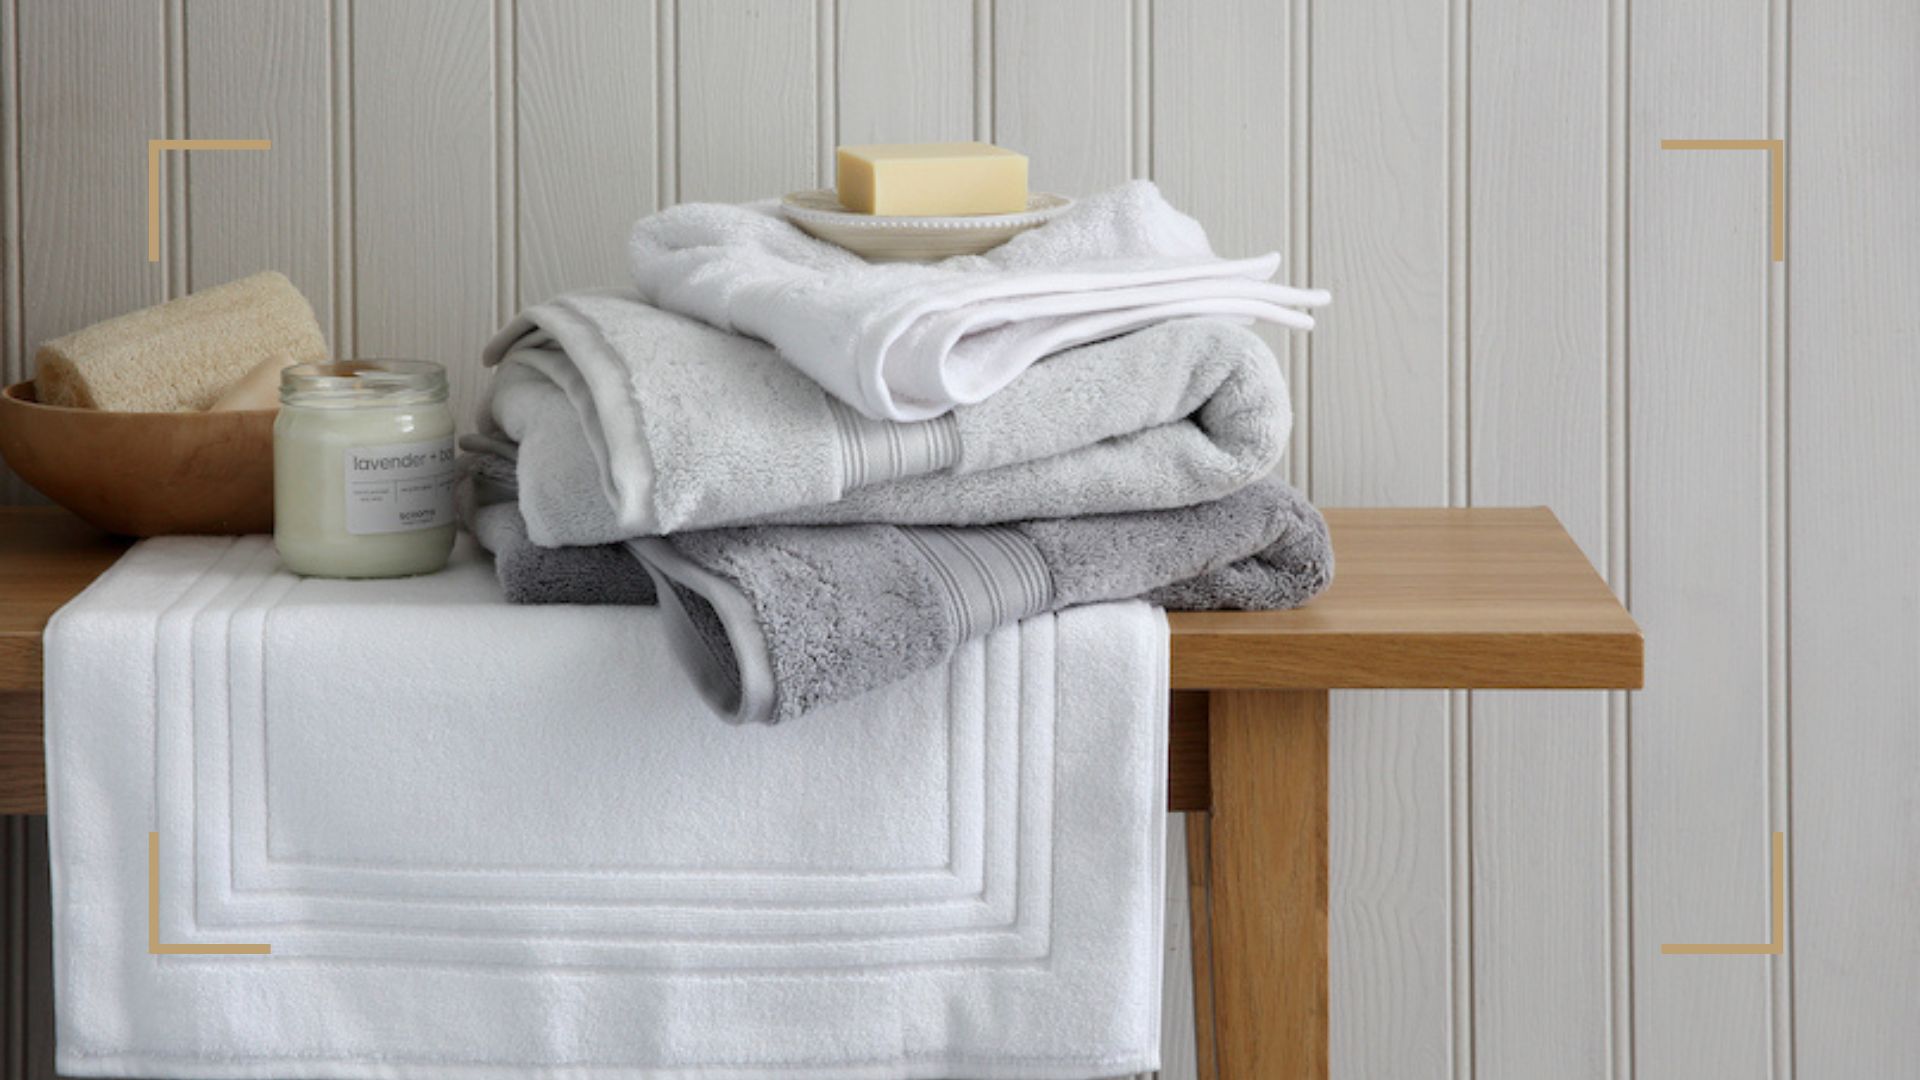 How to wash new towels: The secret to fresh, fluffy, soft towels